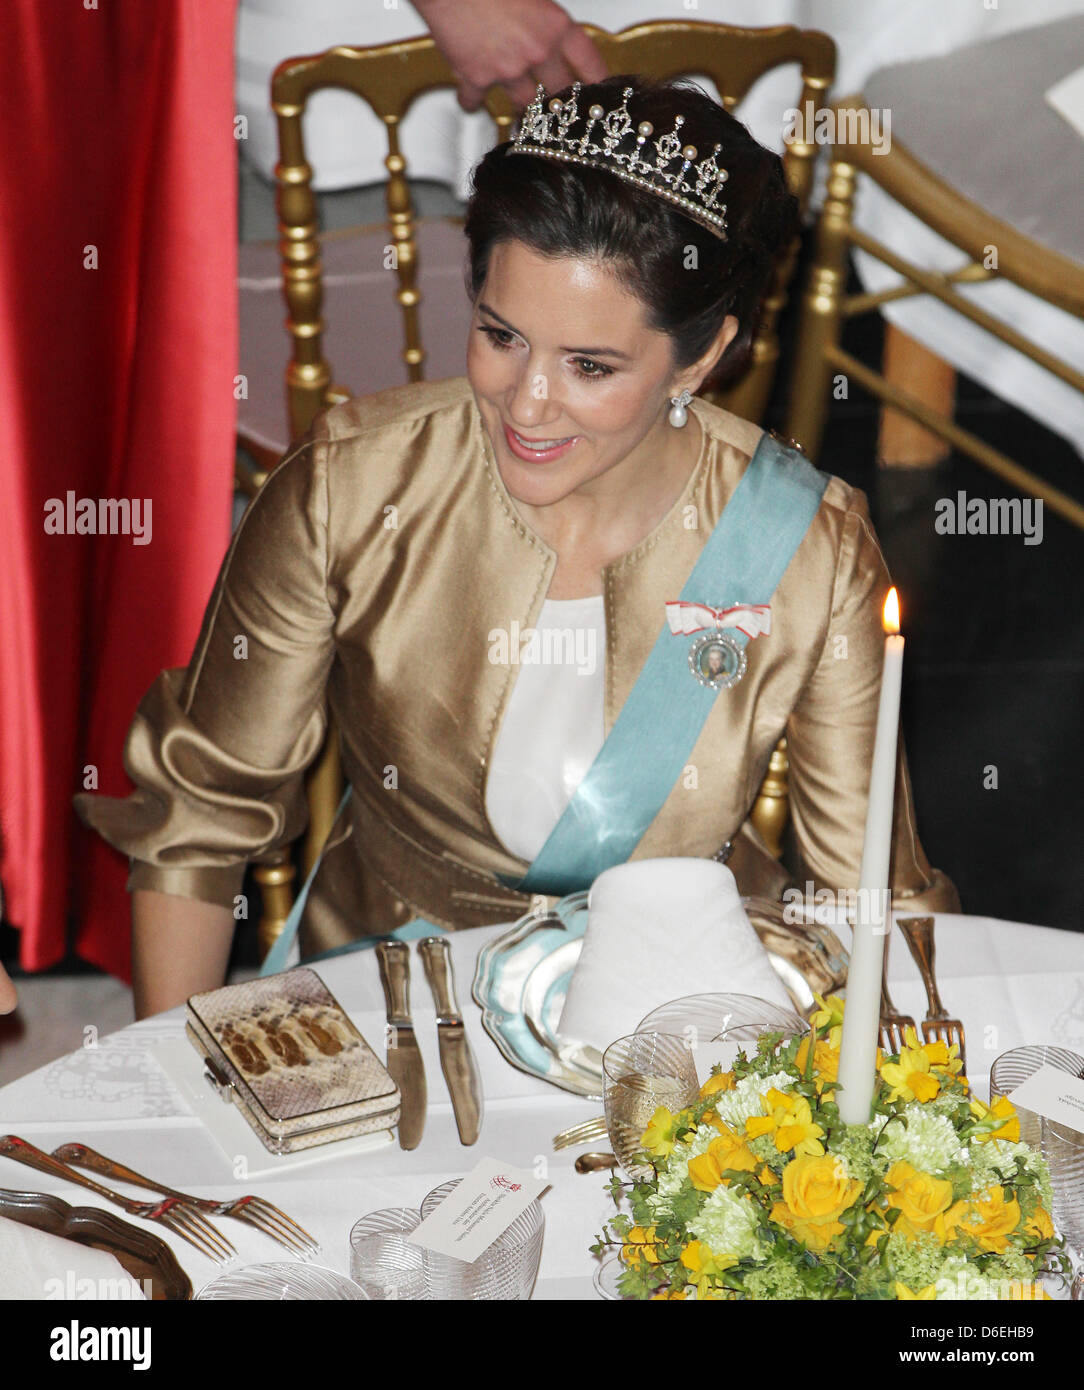 Crown princess Mary of Denmark attends the dinner for the corps on 40th anniversary of Queen Margrethe on the Danish throne in Christiansborg Palace in Copenhagen, Denmark, February 2012.